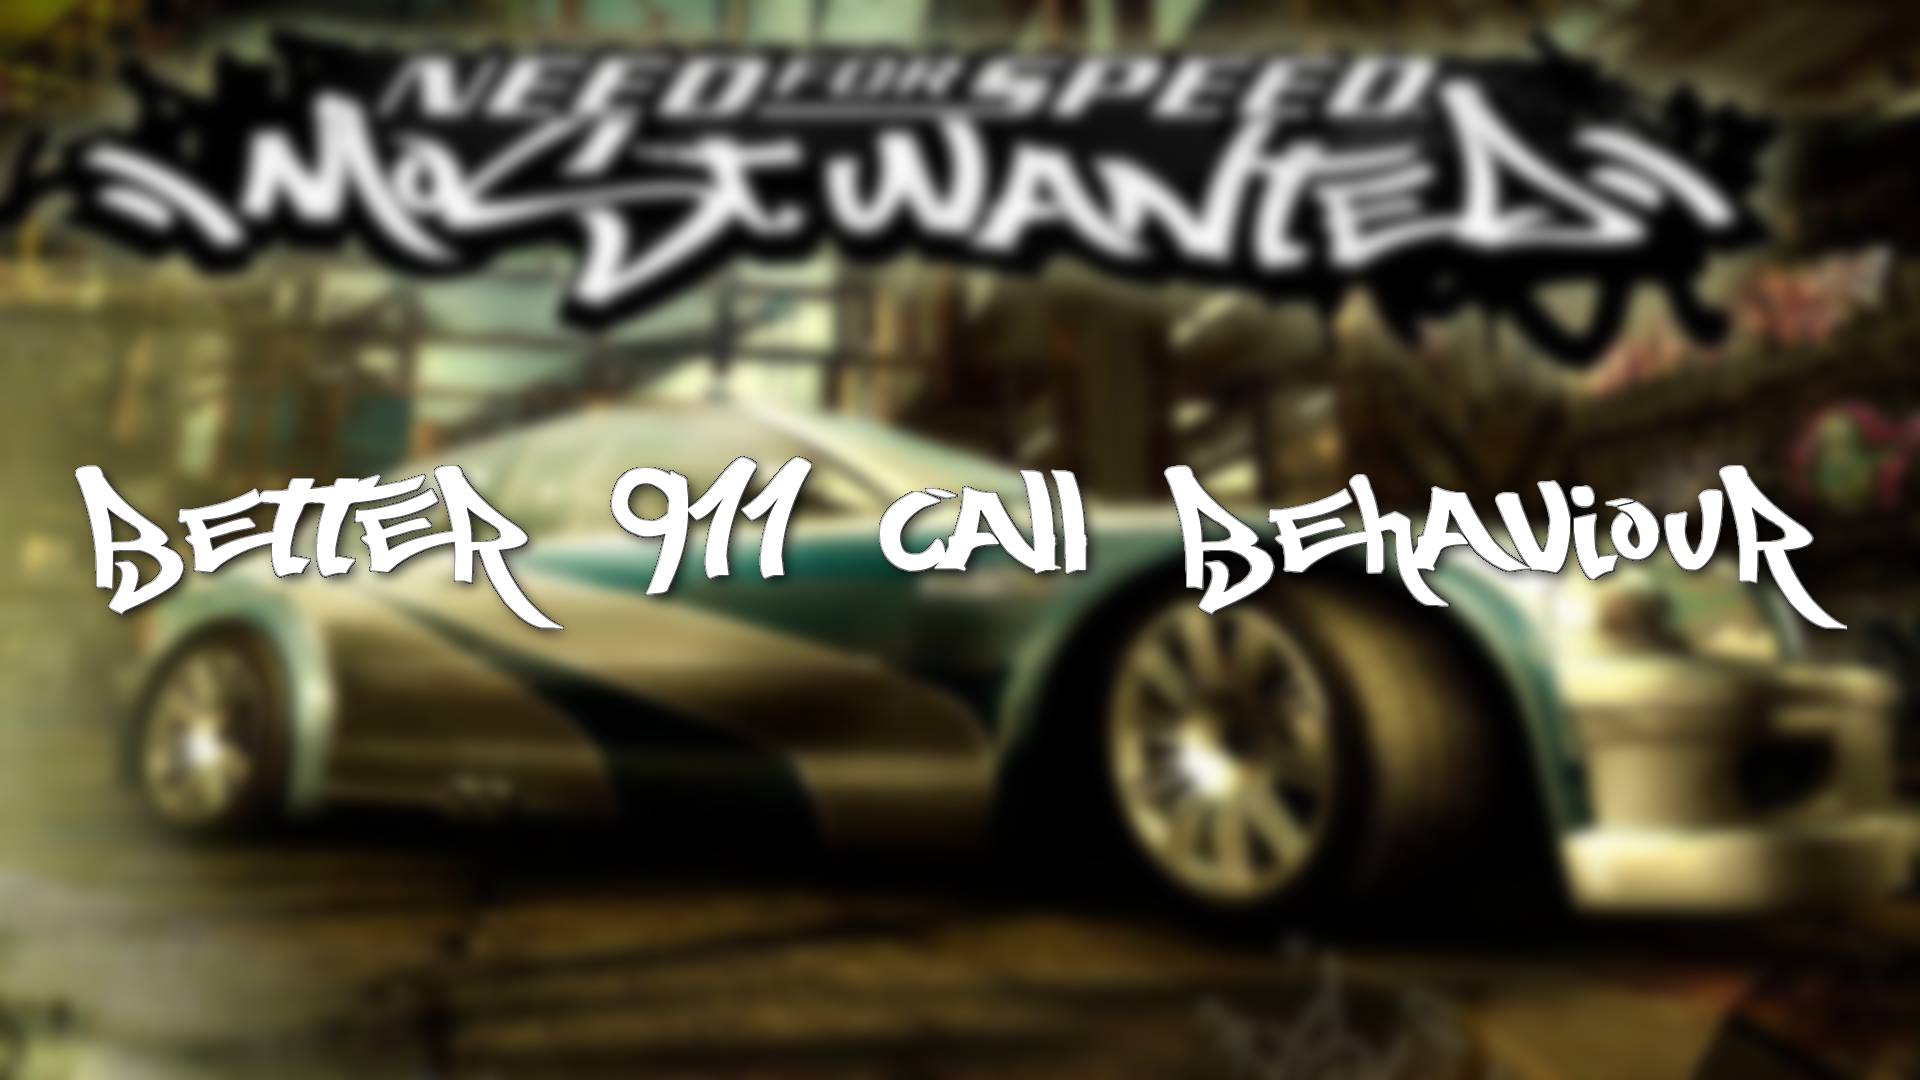 Need For Speed Most Wanted Better 911 Call Behaviour